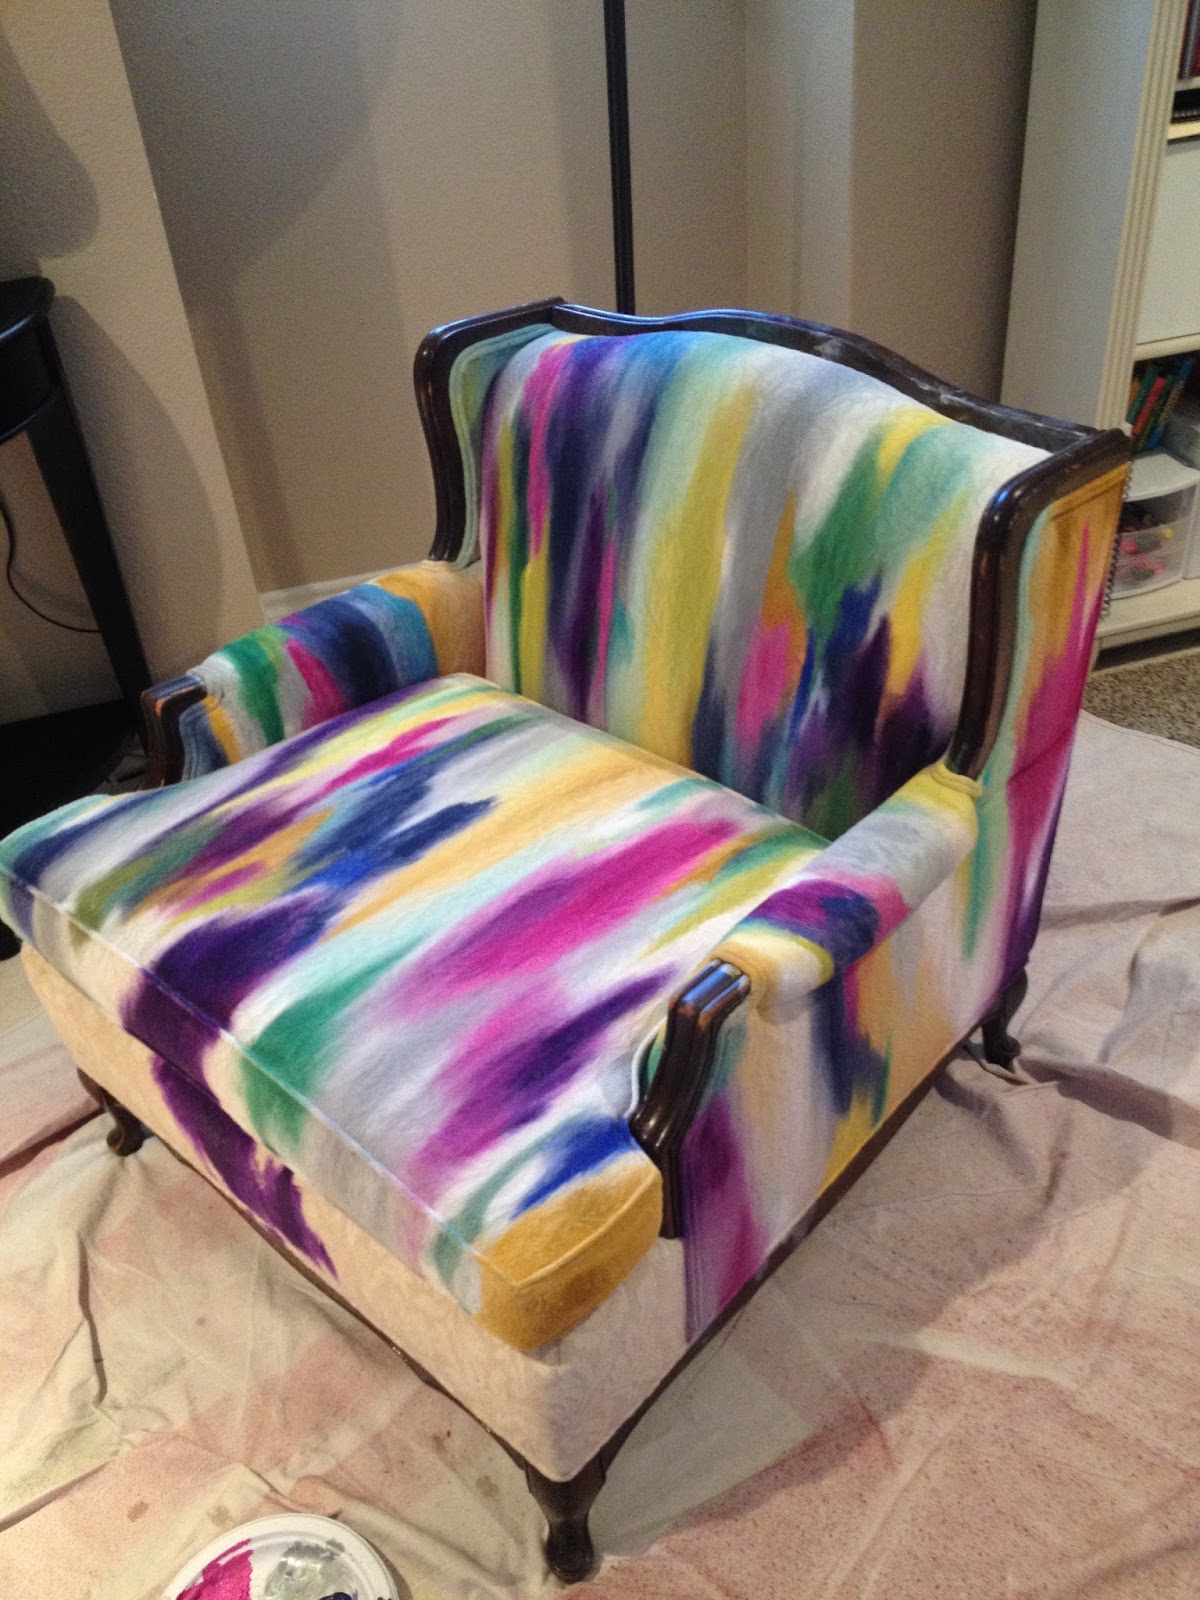 Crackled Painted Fabric Chair - A Total Happy Accident